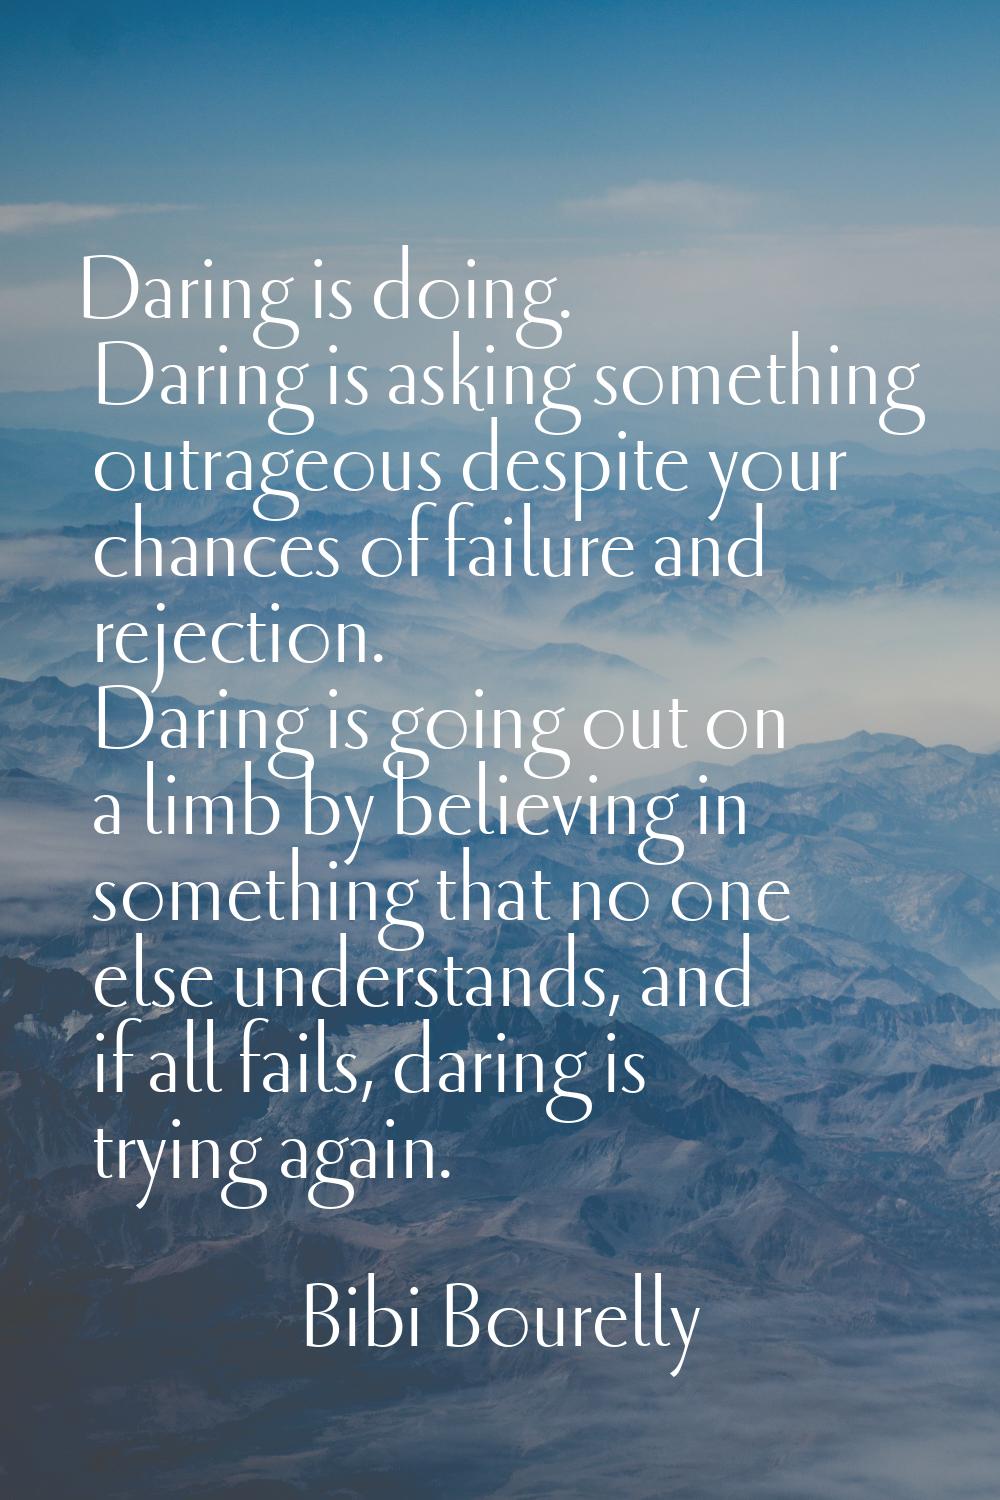 Daring is doing. Daring is asking something outrageous despite your chances of failure and rejectio